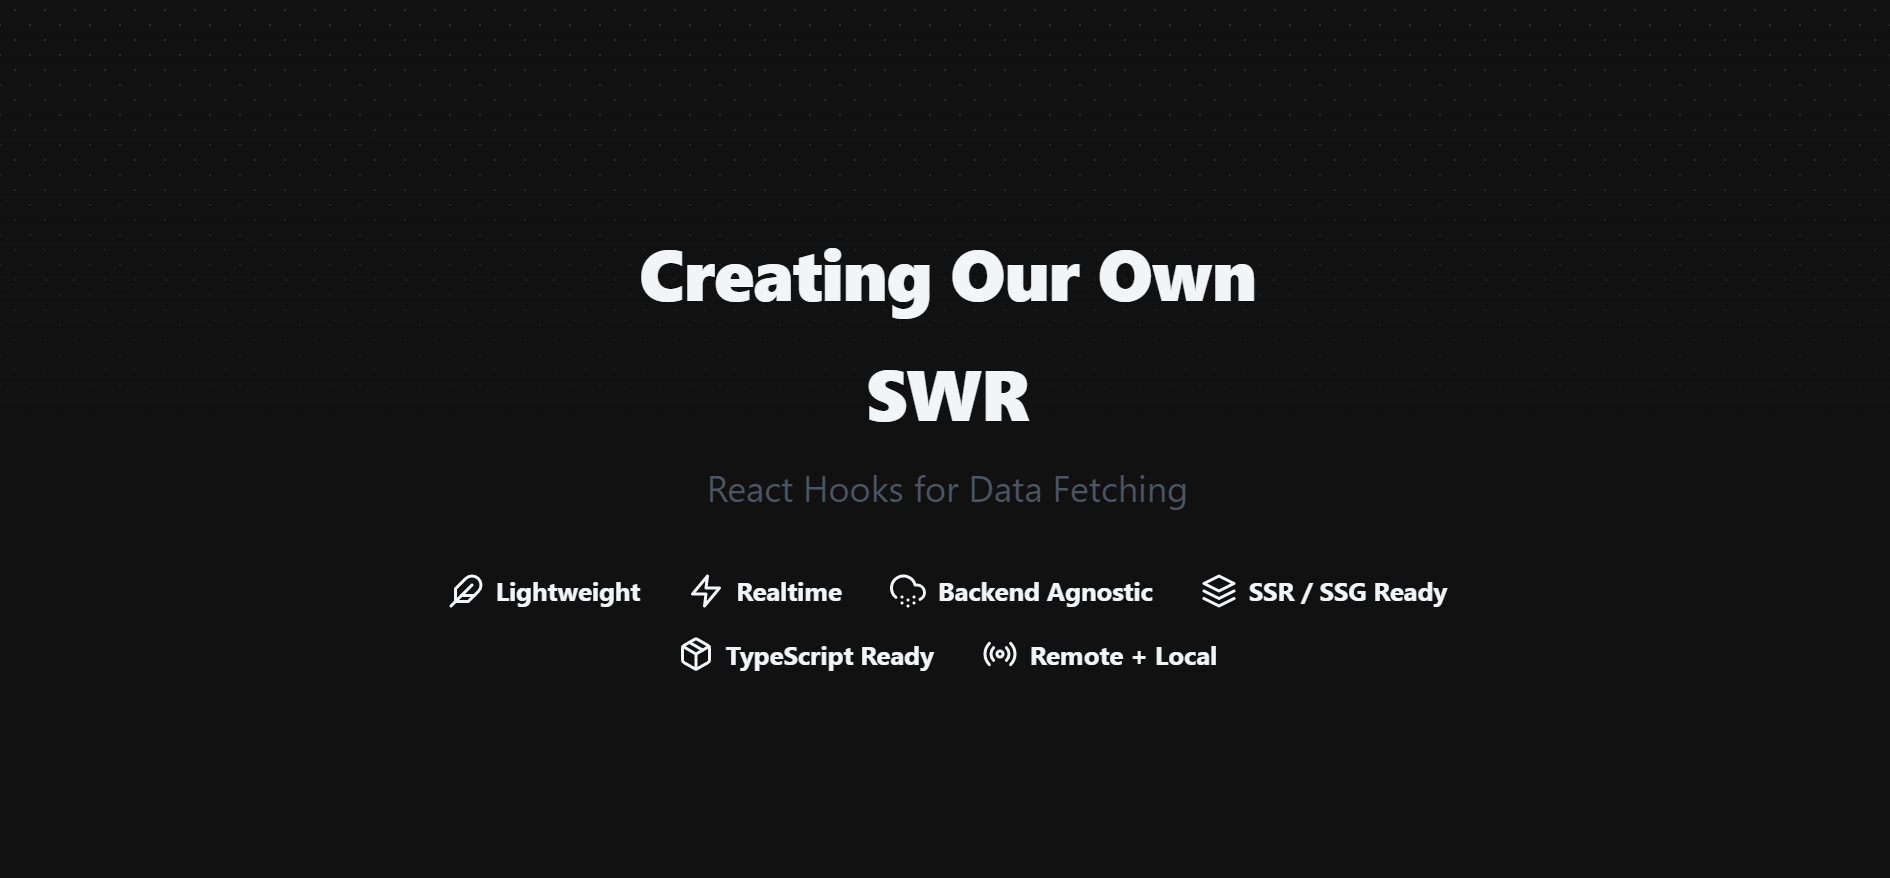 SWR from Vercel is amazing! We'll try to create it ourselves in this post